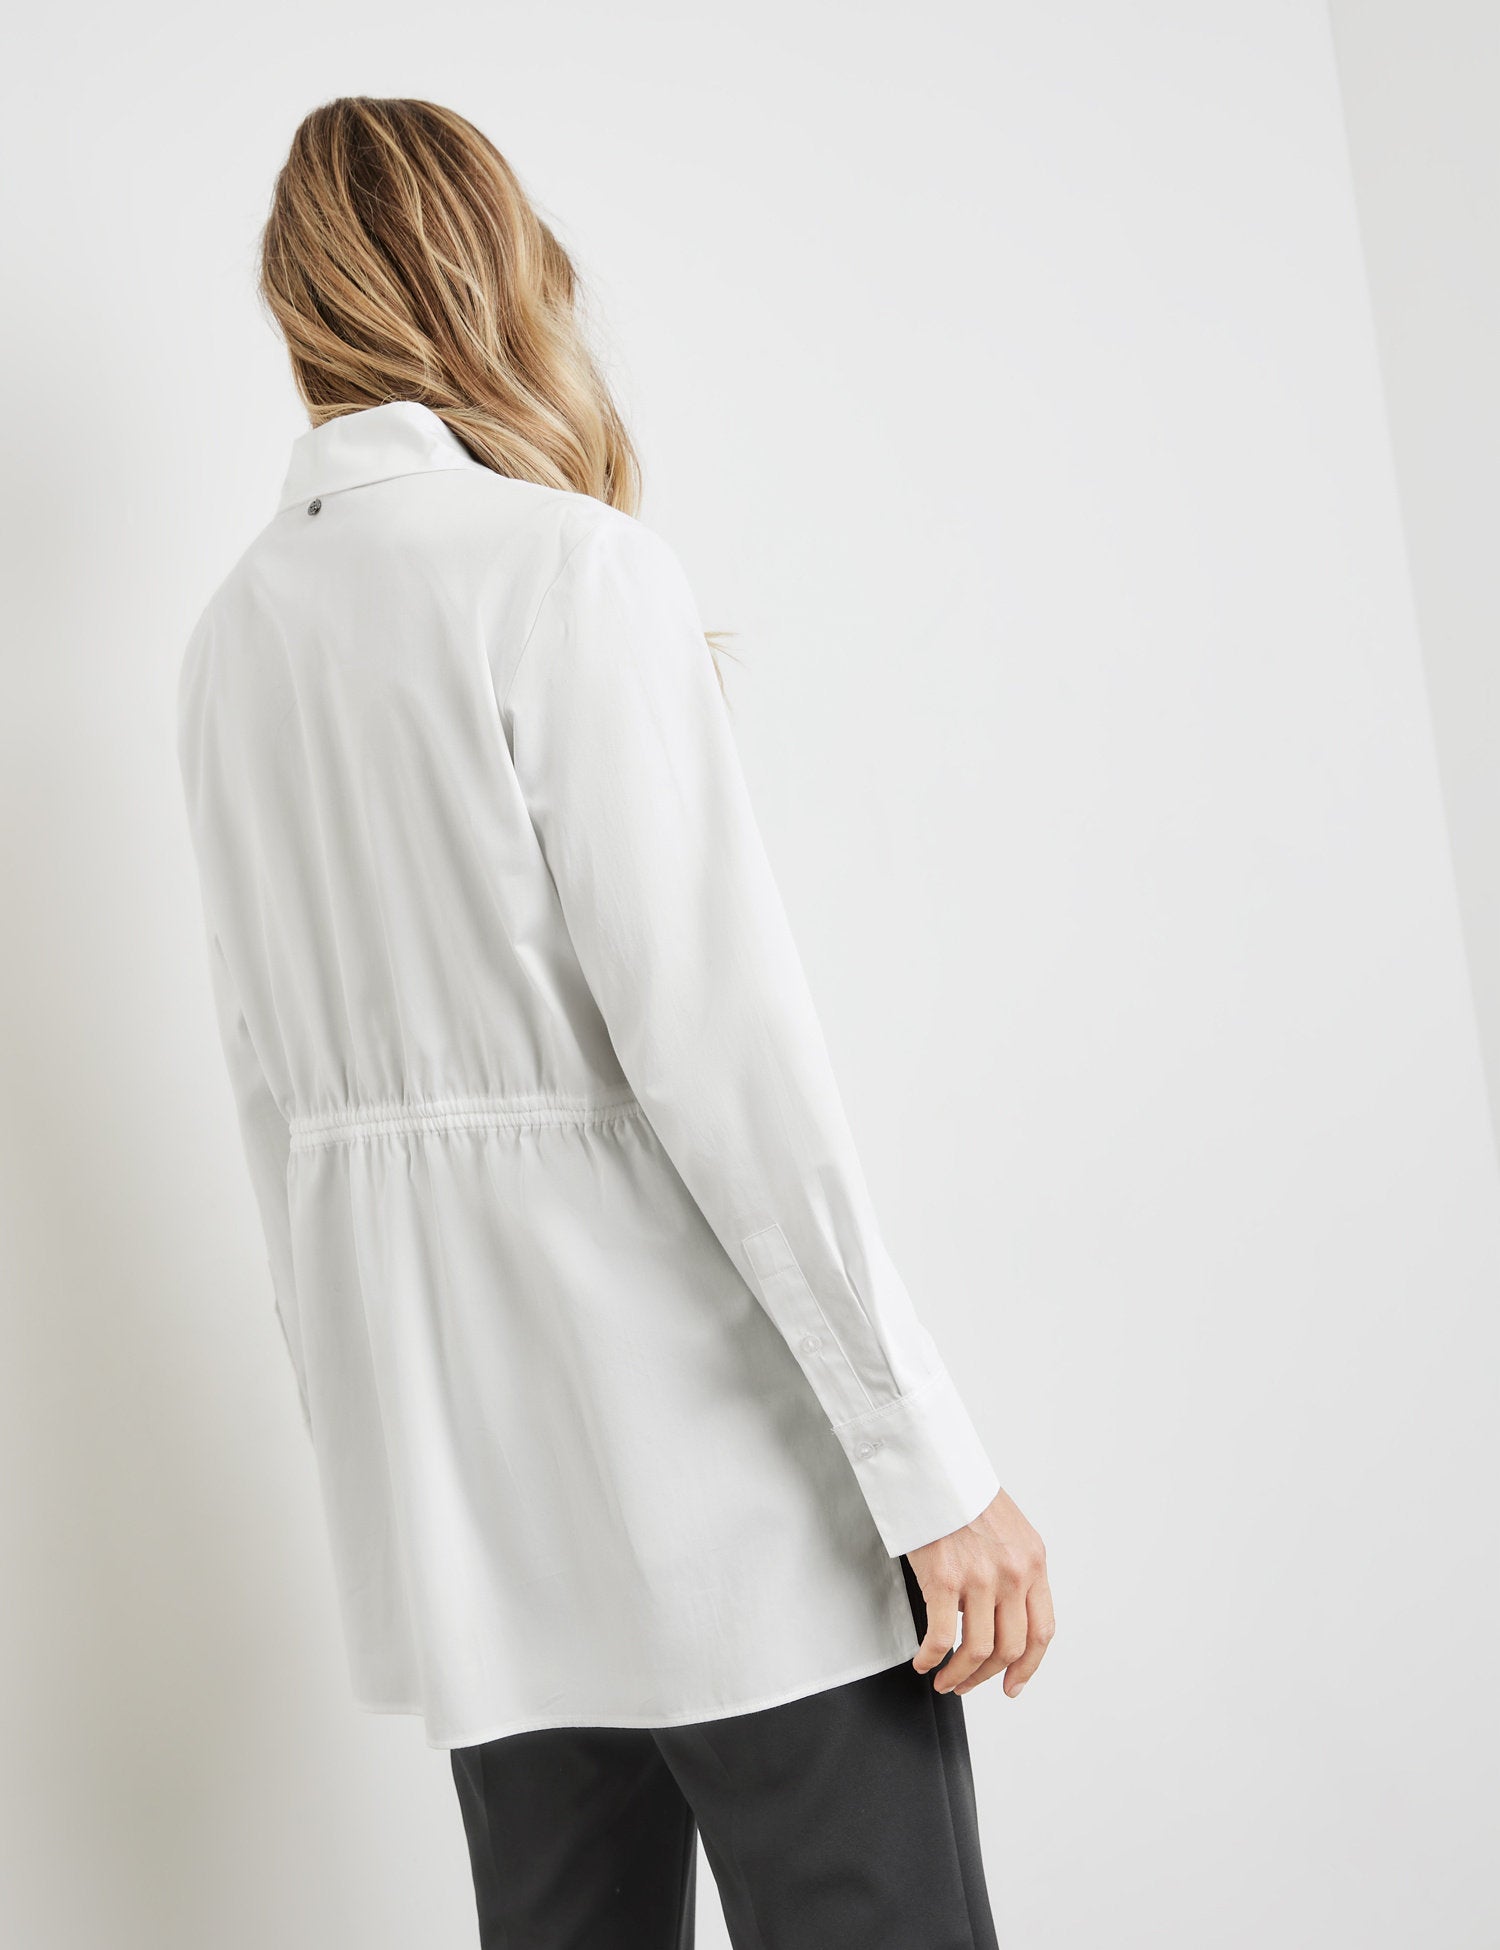 Classic Long Blouse With Side Slits And Gathers_160048-66401_99600_06